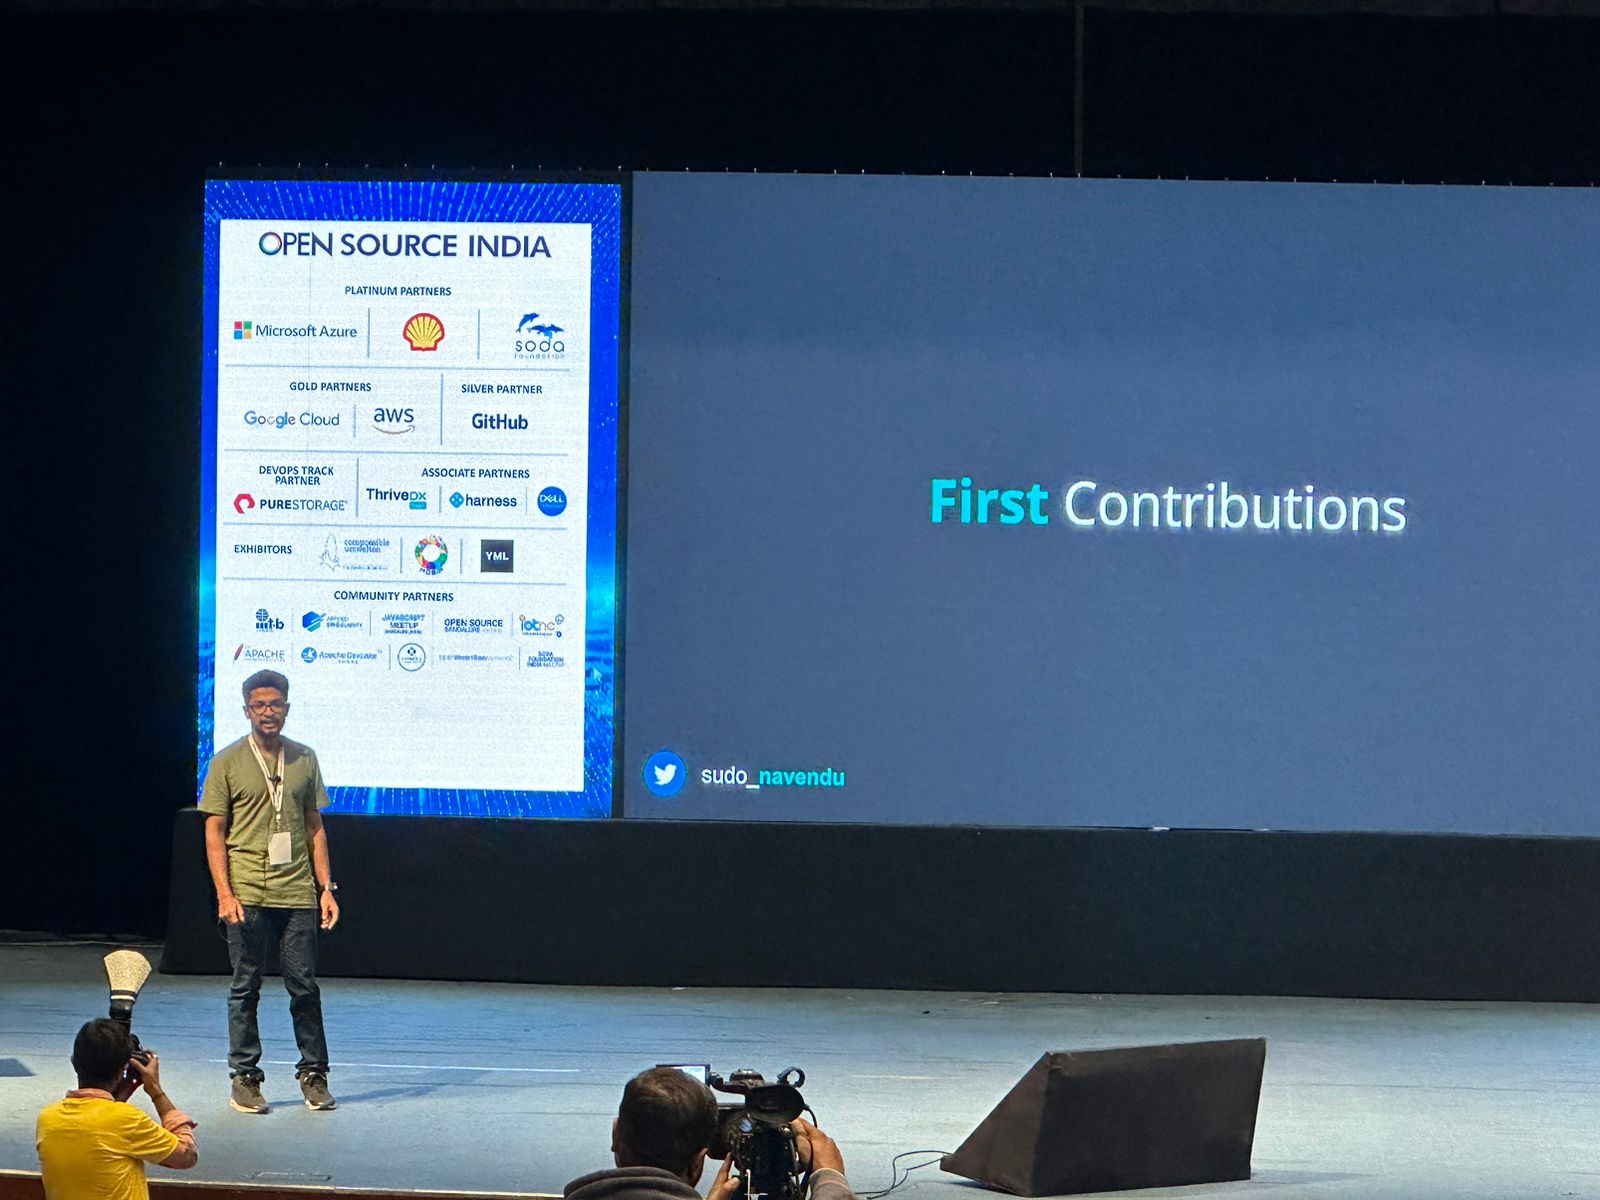 Speaking at Open Source India